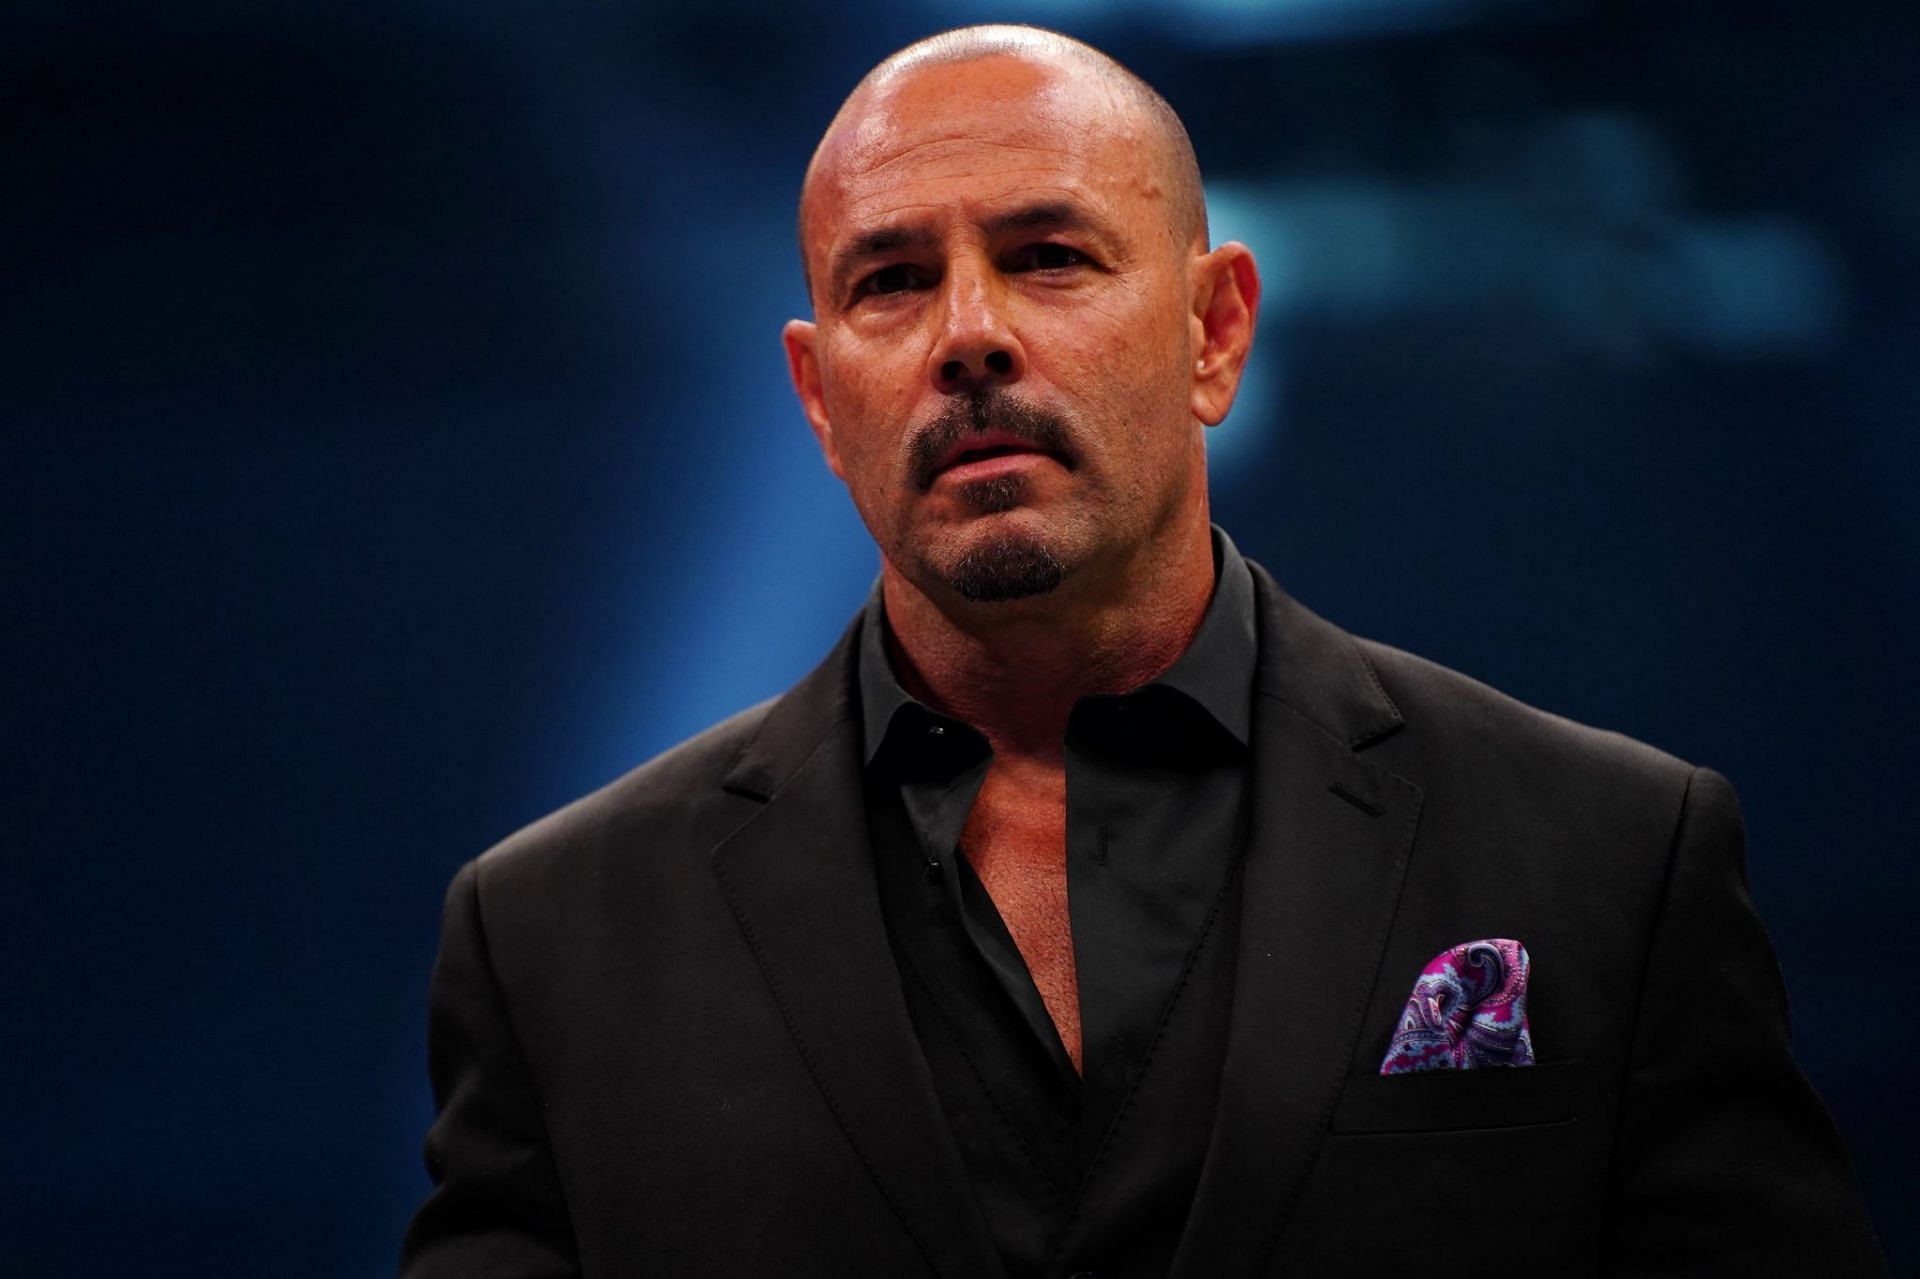 Chavo Guerrero was not at all happy with his AEW situation